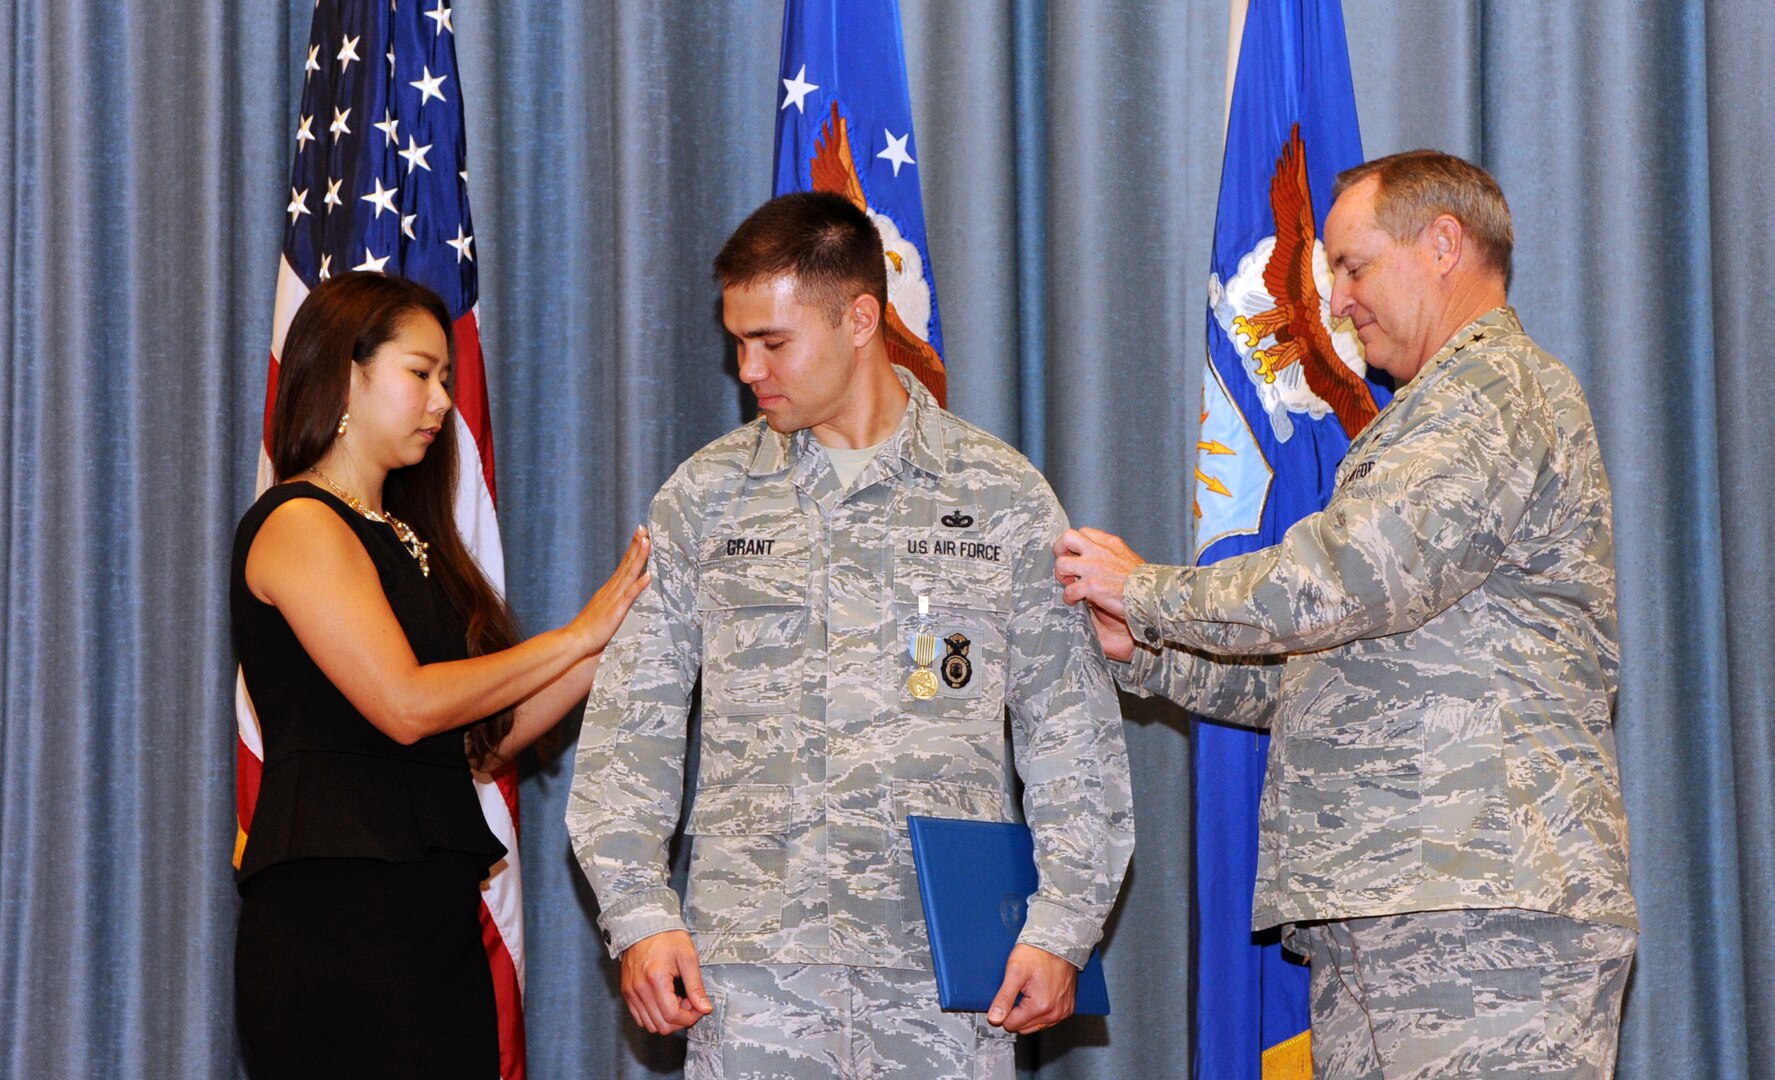 Eriko Grant, wife of Edward Grant, at left; and Air Force Chief of Staff Gen. Mark A. Welsh III, far right; tack technical sergeant stripes onto the sleeves of Edward Grant during an All Call at Joint Base San Antonio-Randolph’s Fleenor Auditorium Sept. 12.  Before the promotion, Welsh presented Grant with the Airman’s Medal, given to service members or those of a friendly nation while serving in any capacity with the U.S. Air Force distinguishing themselves with heroic actions, usually at the voluntary risk of their lives. Grant is a defender with the 902nd Security Forces Squadron at JBSA-Randolph. (U. S. Air Force photo by Melissa Peterson)
